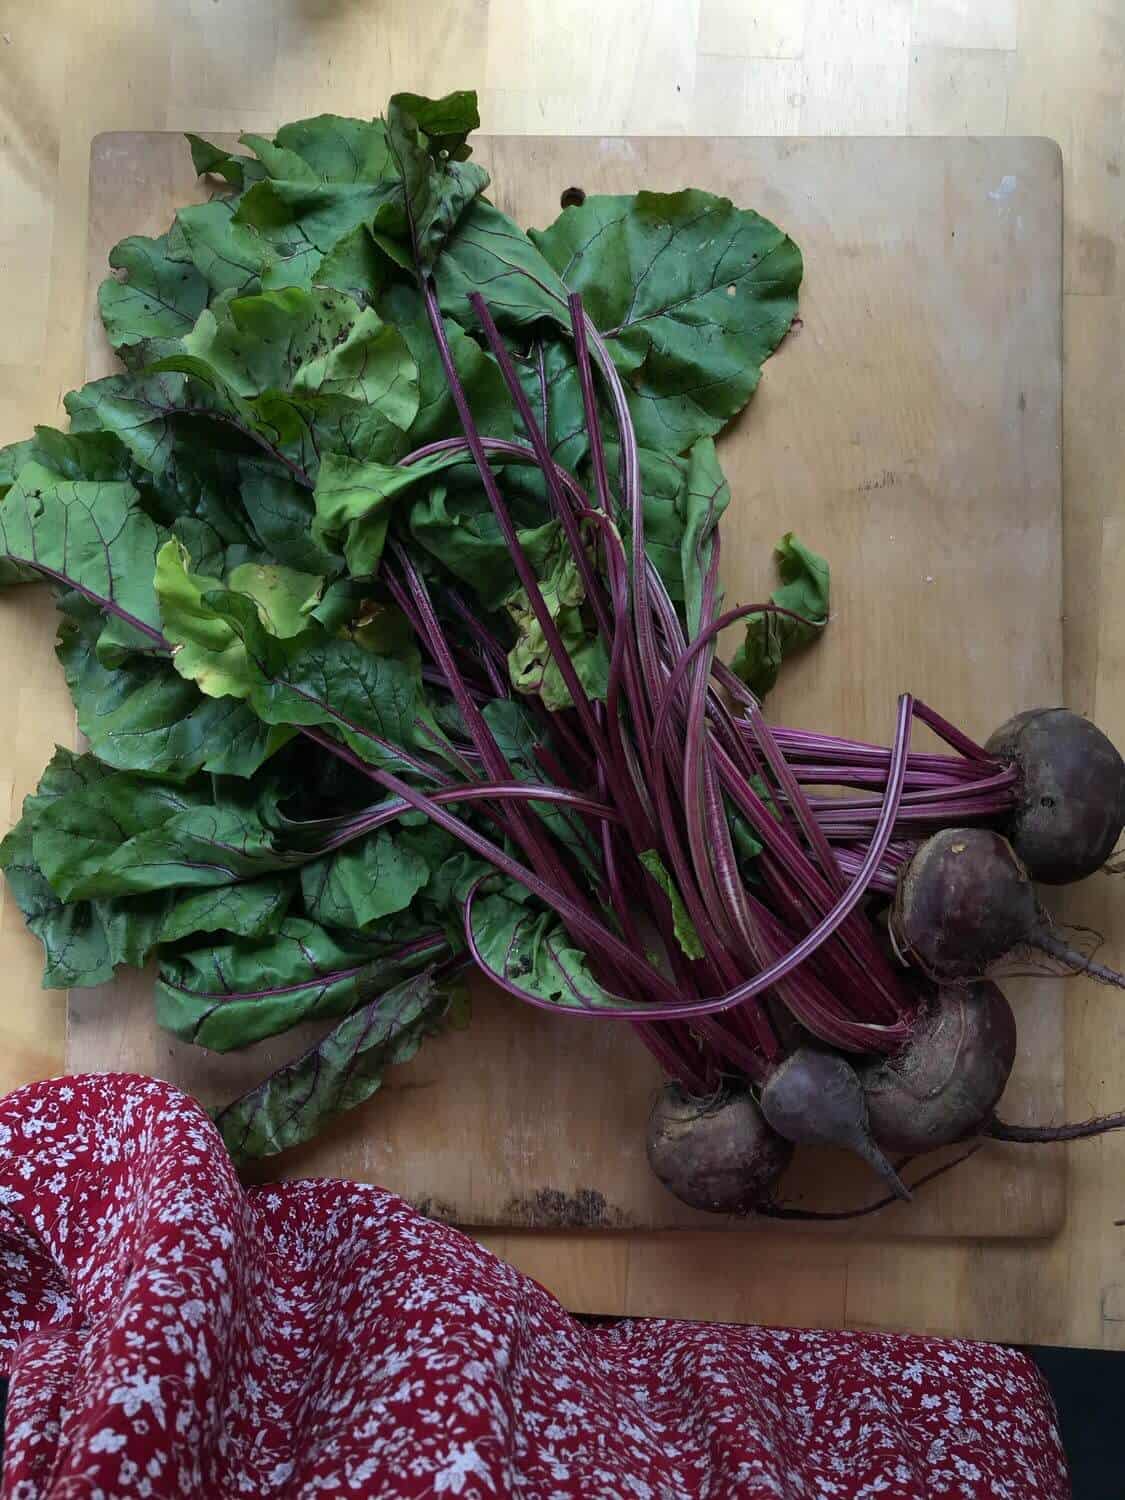 Beets ready to eaten